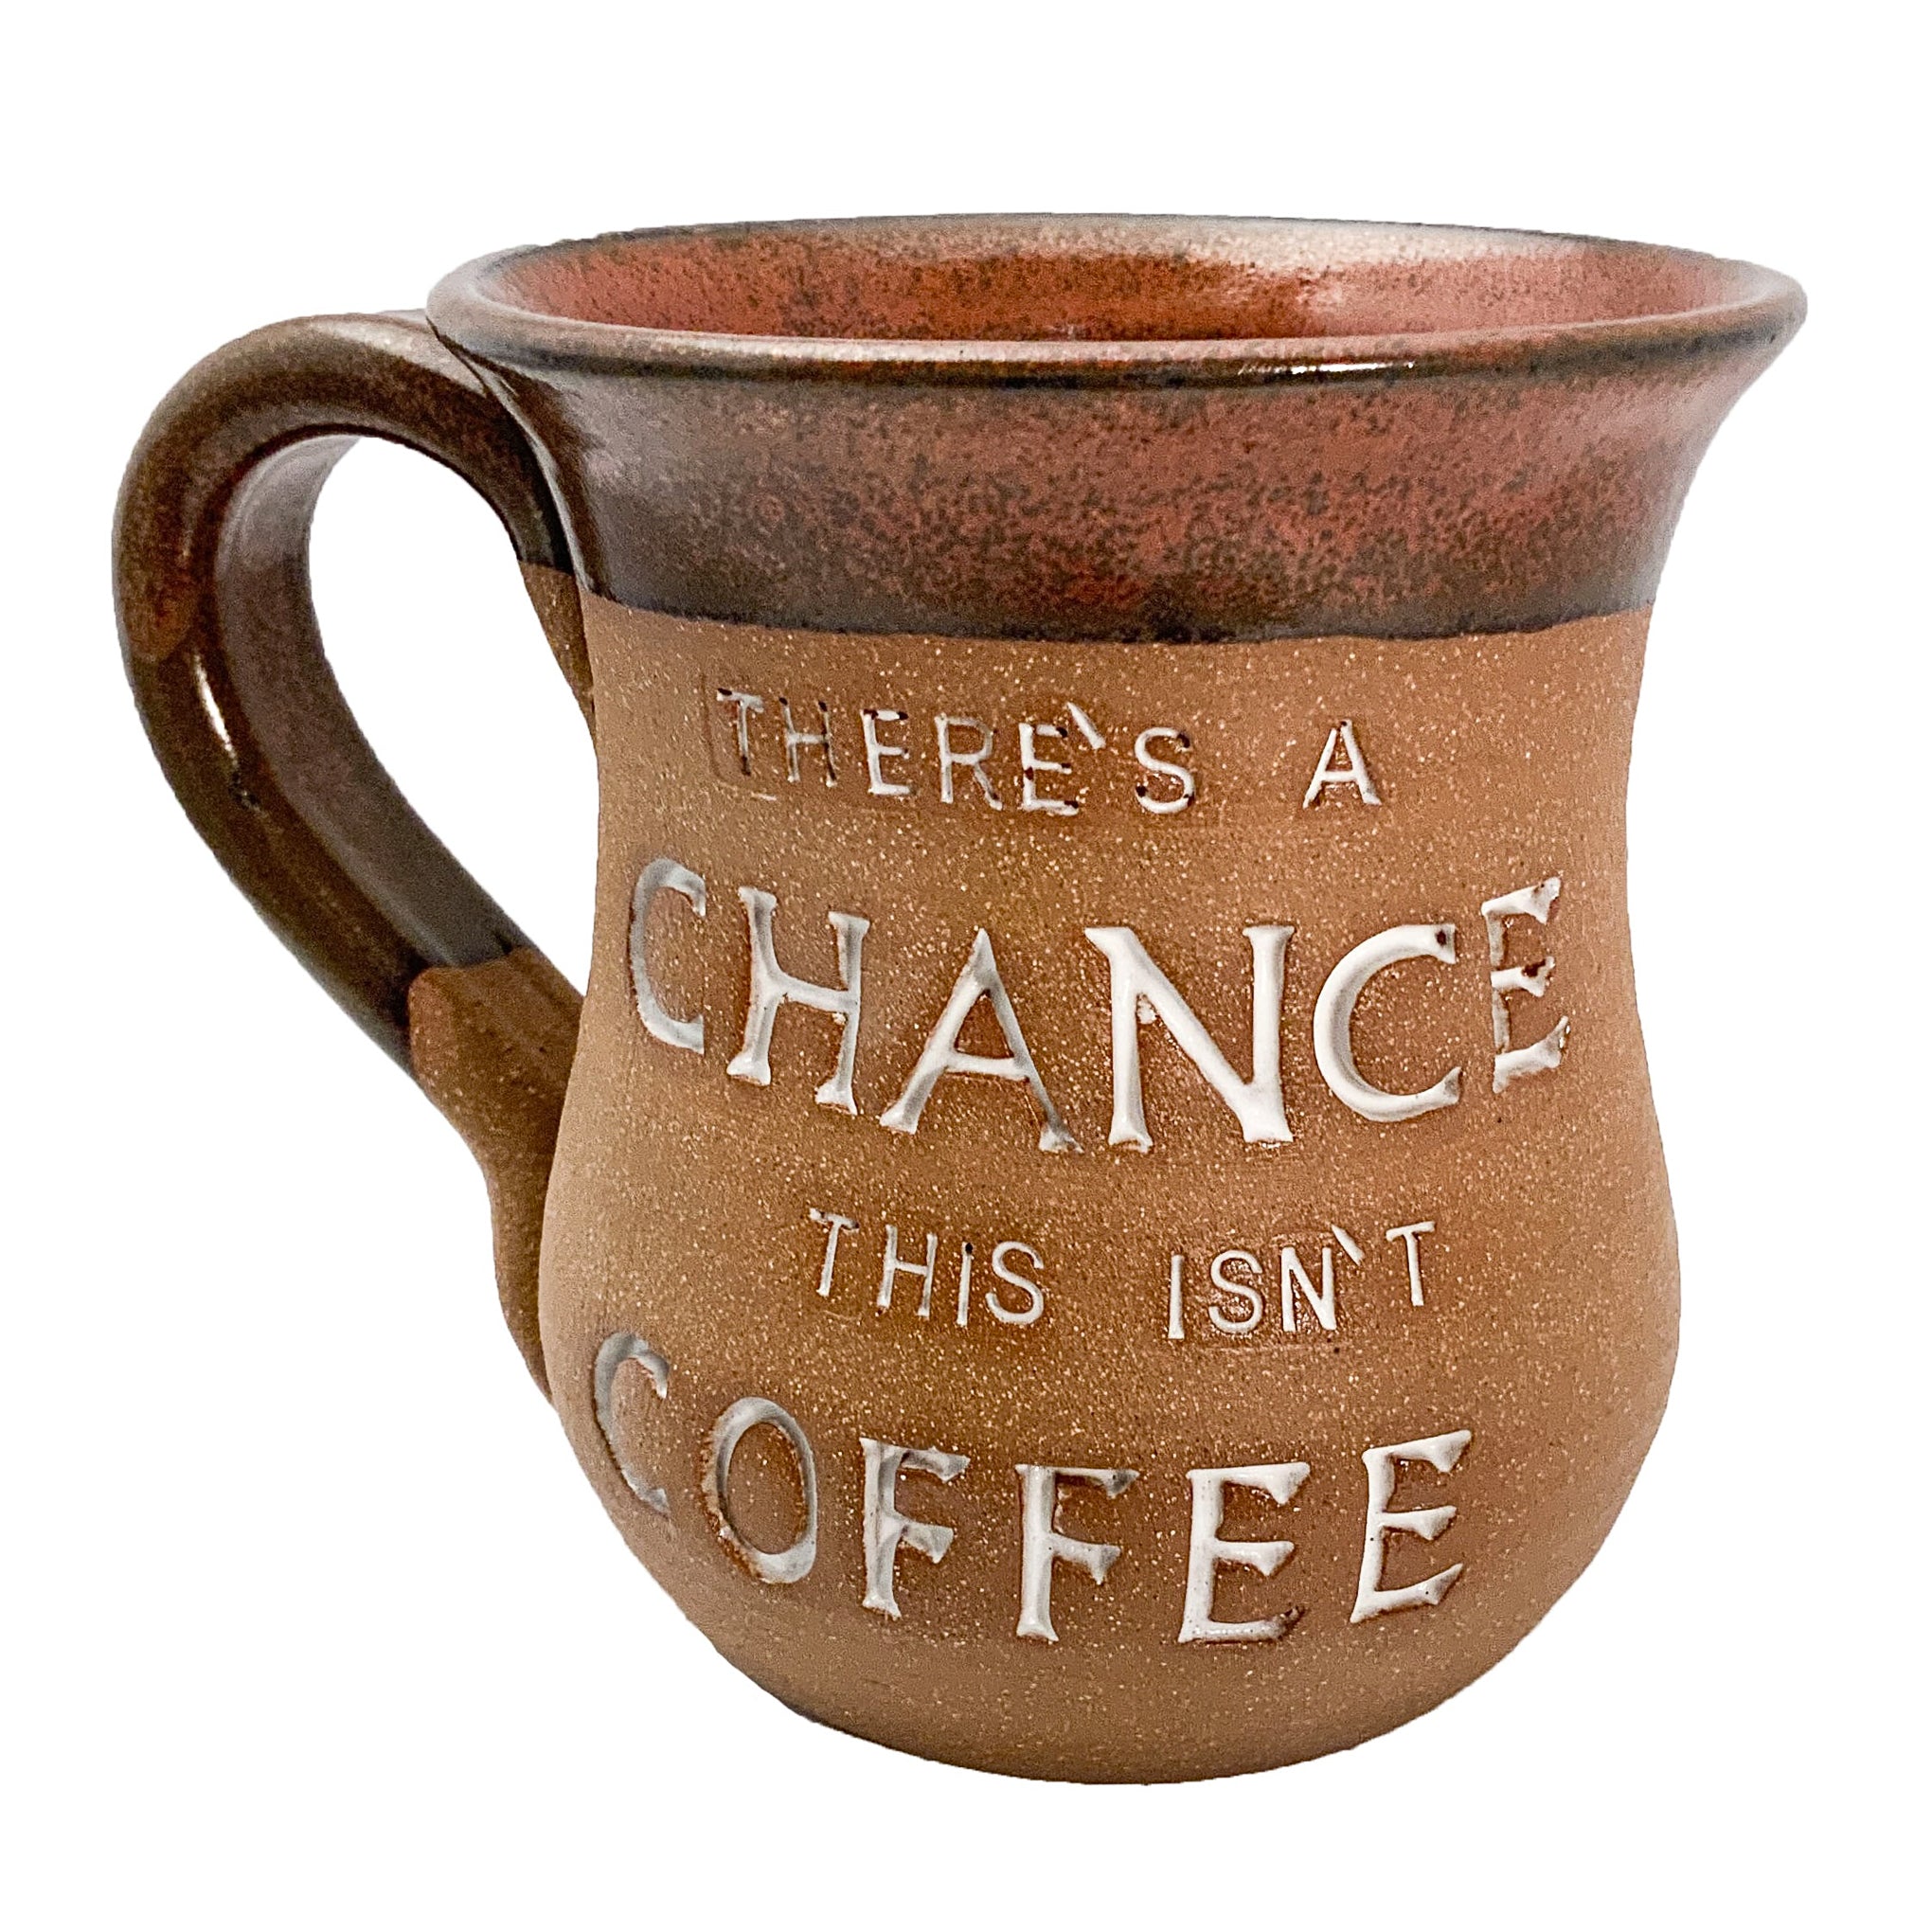 "THERE'S A CHANCE THIS ISN'T COFFEE" MUG